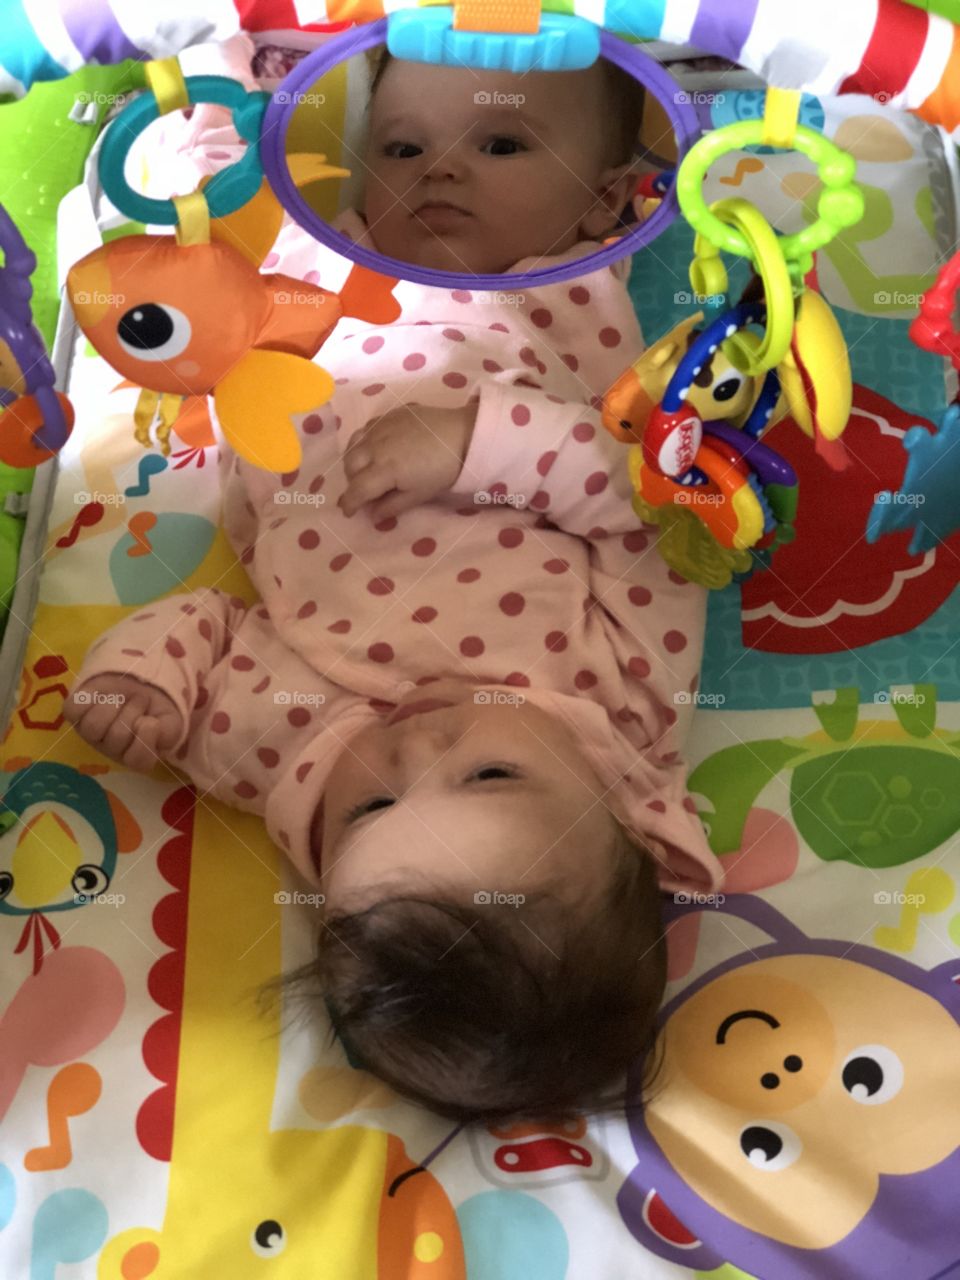 Tummy time play time!